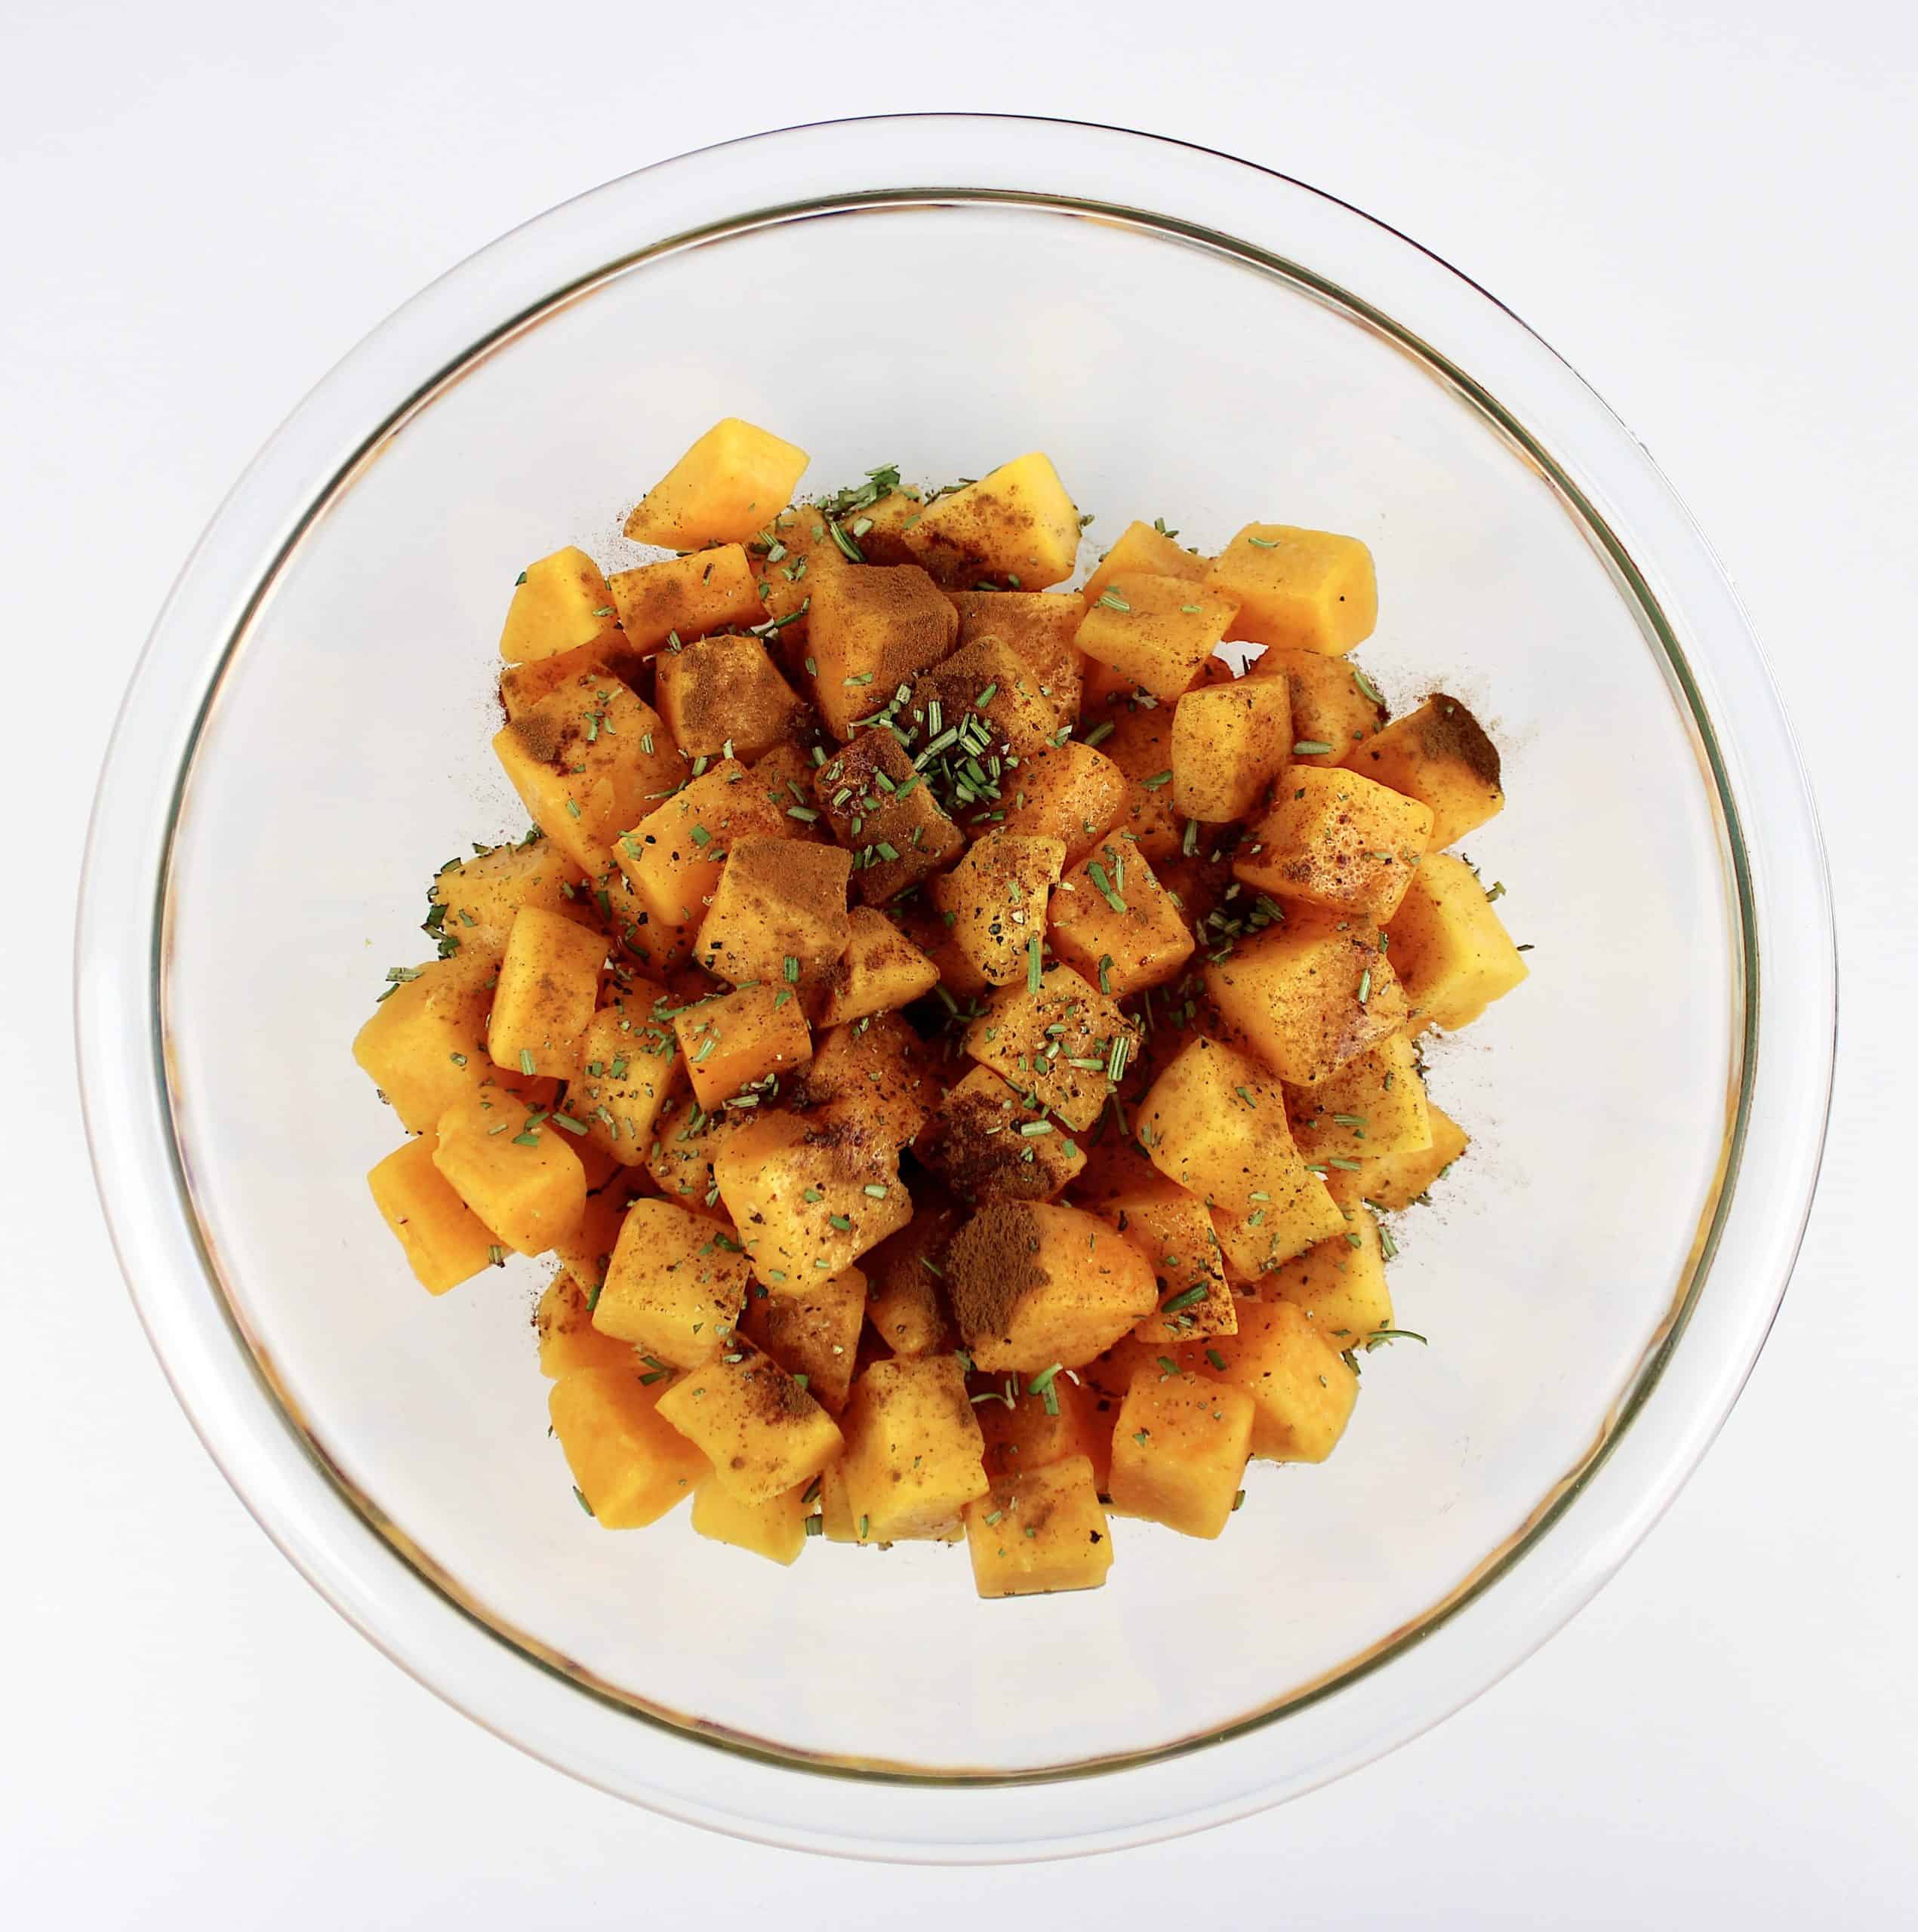 cubed butternut squash in glass bowl with spices on top